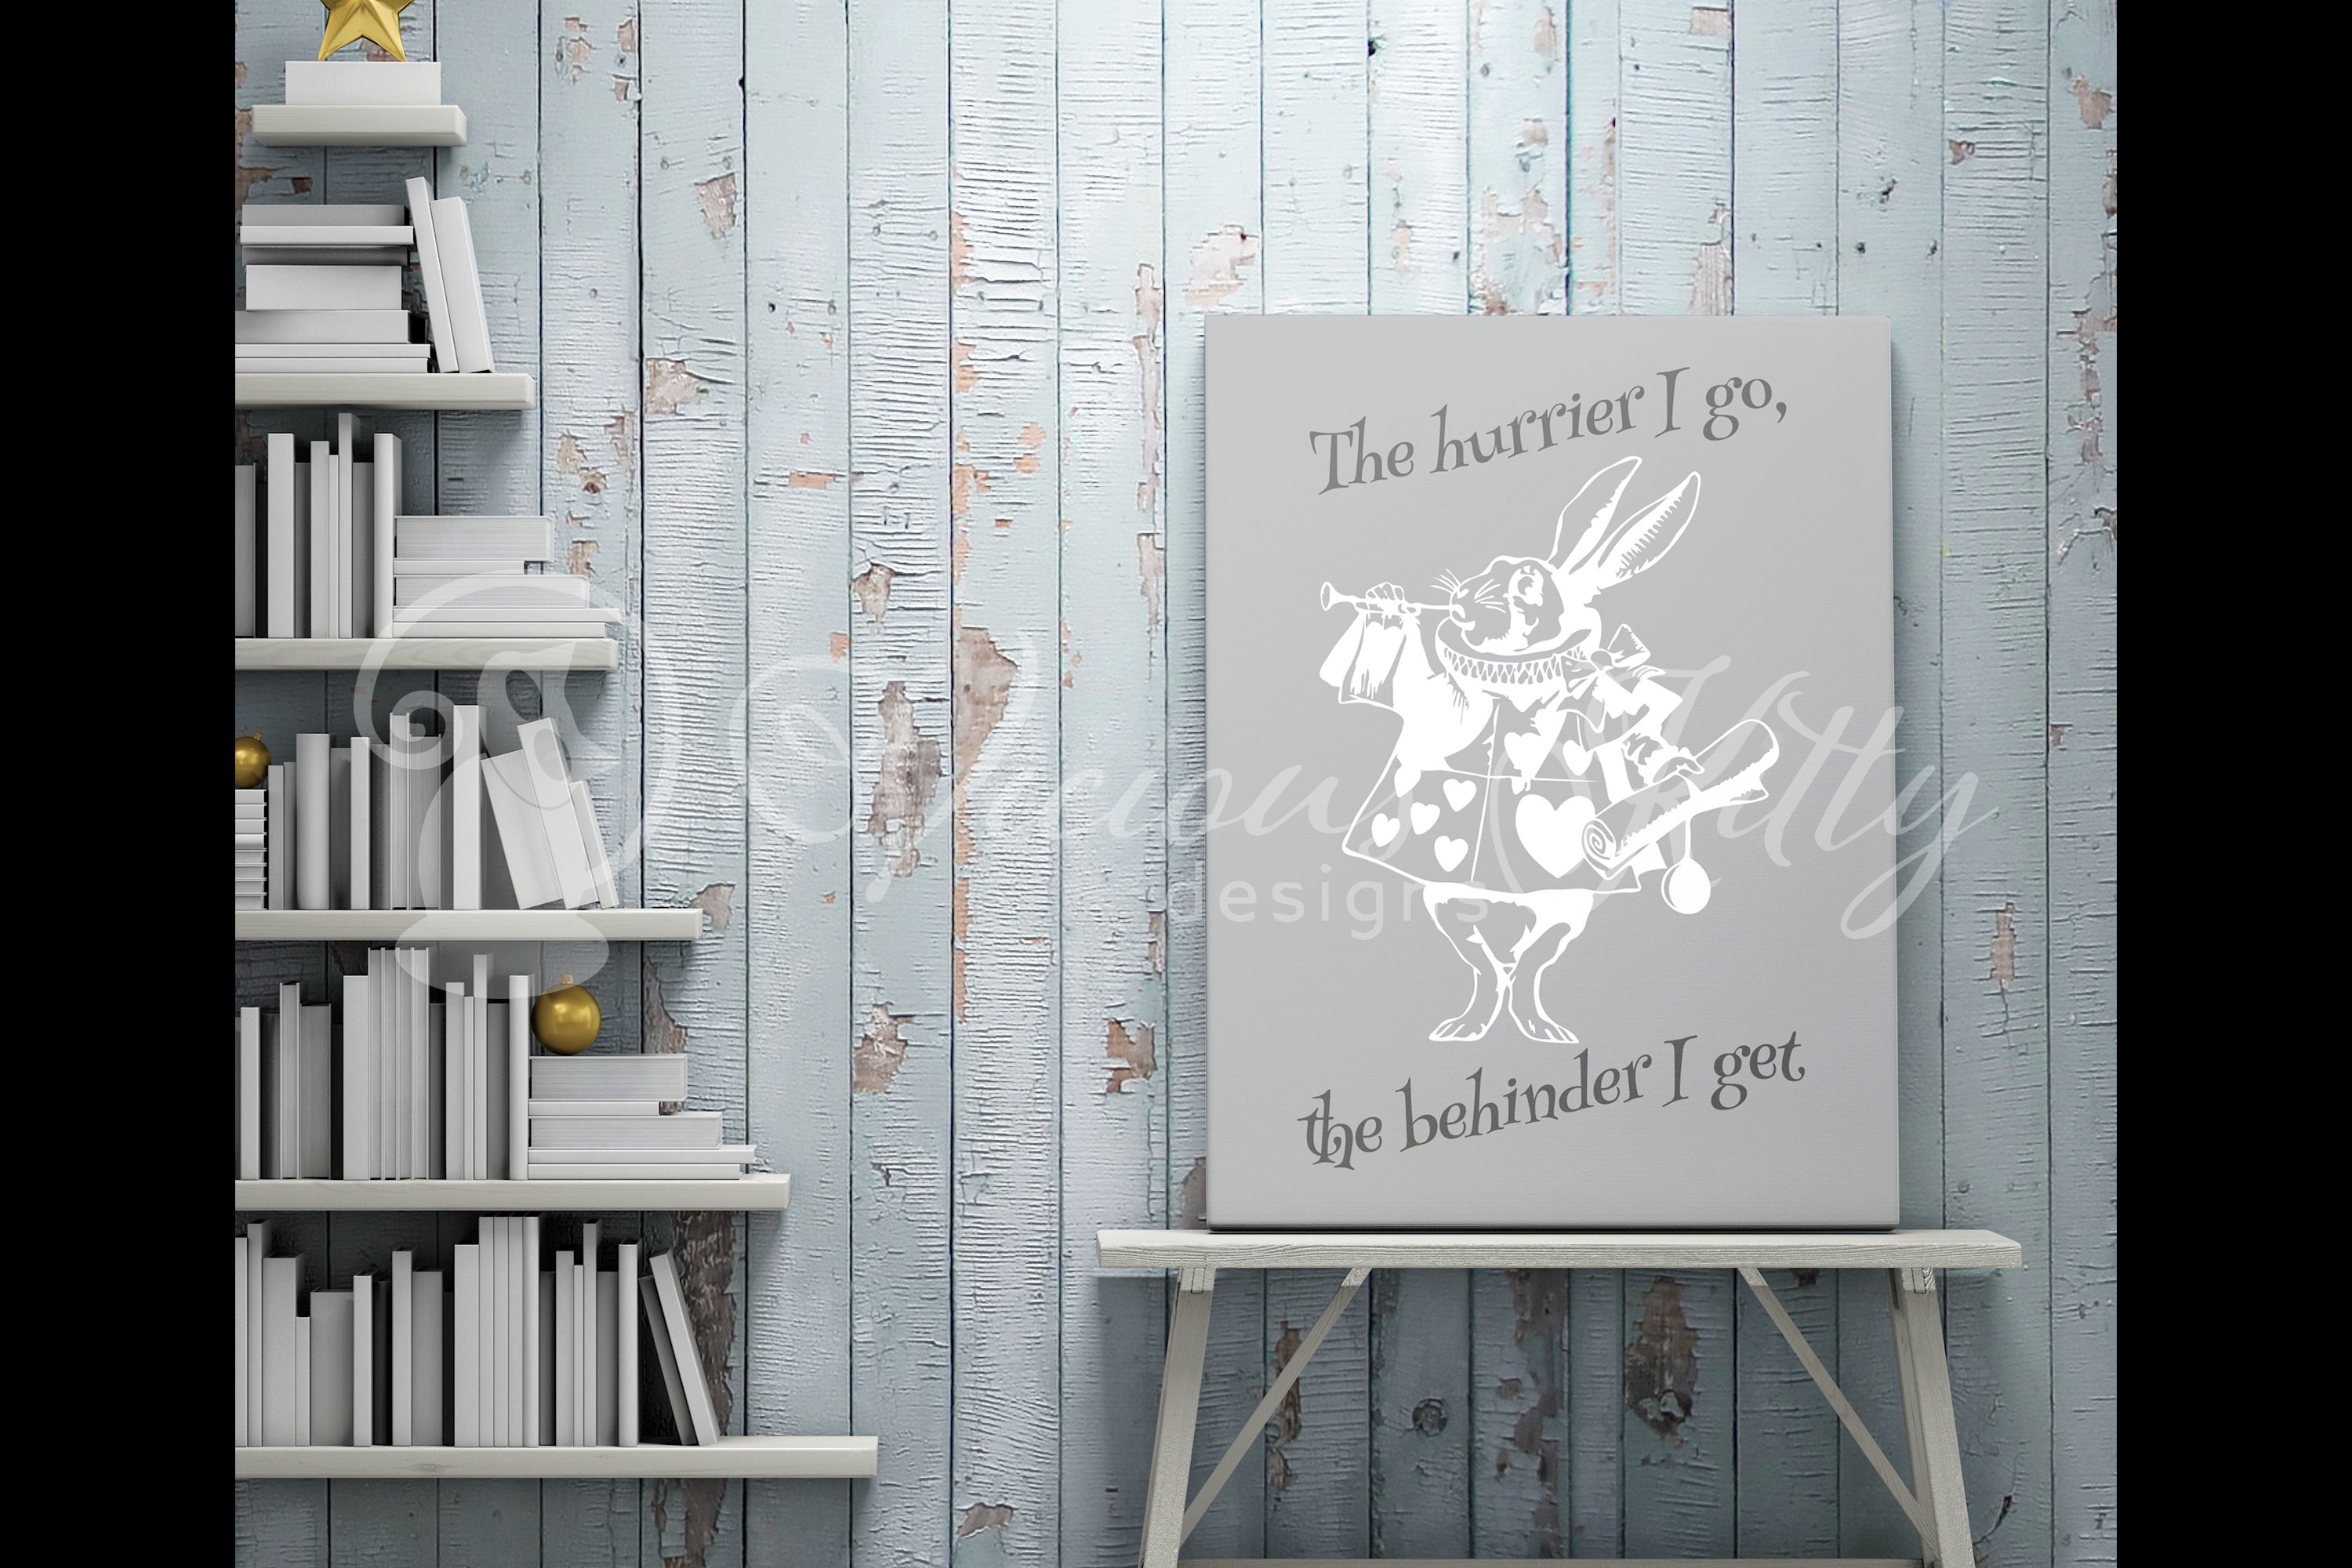 White rabbit on canvas for handmade painting.